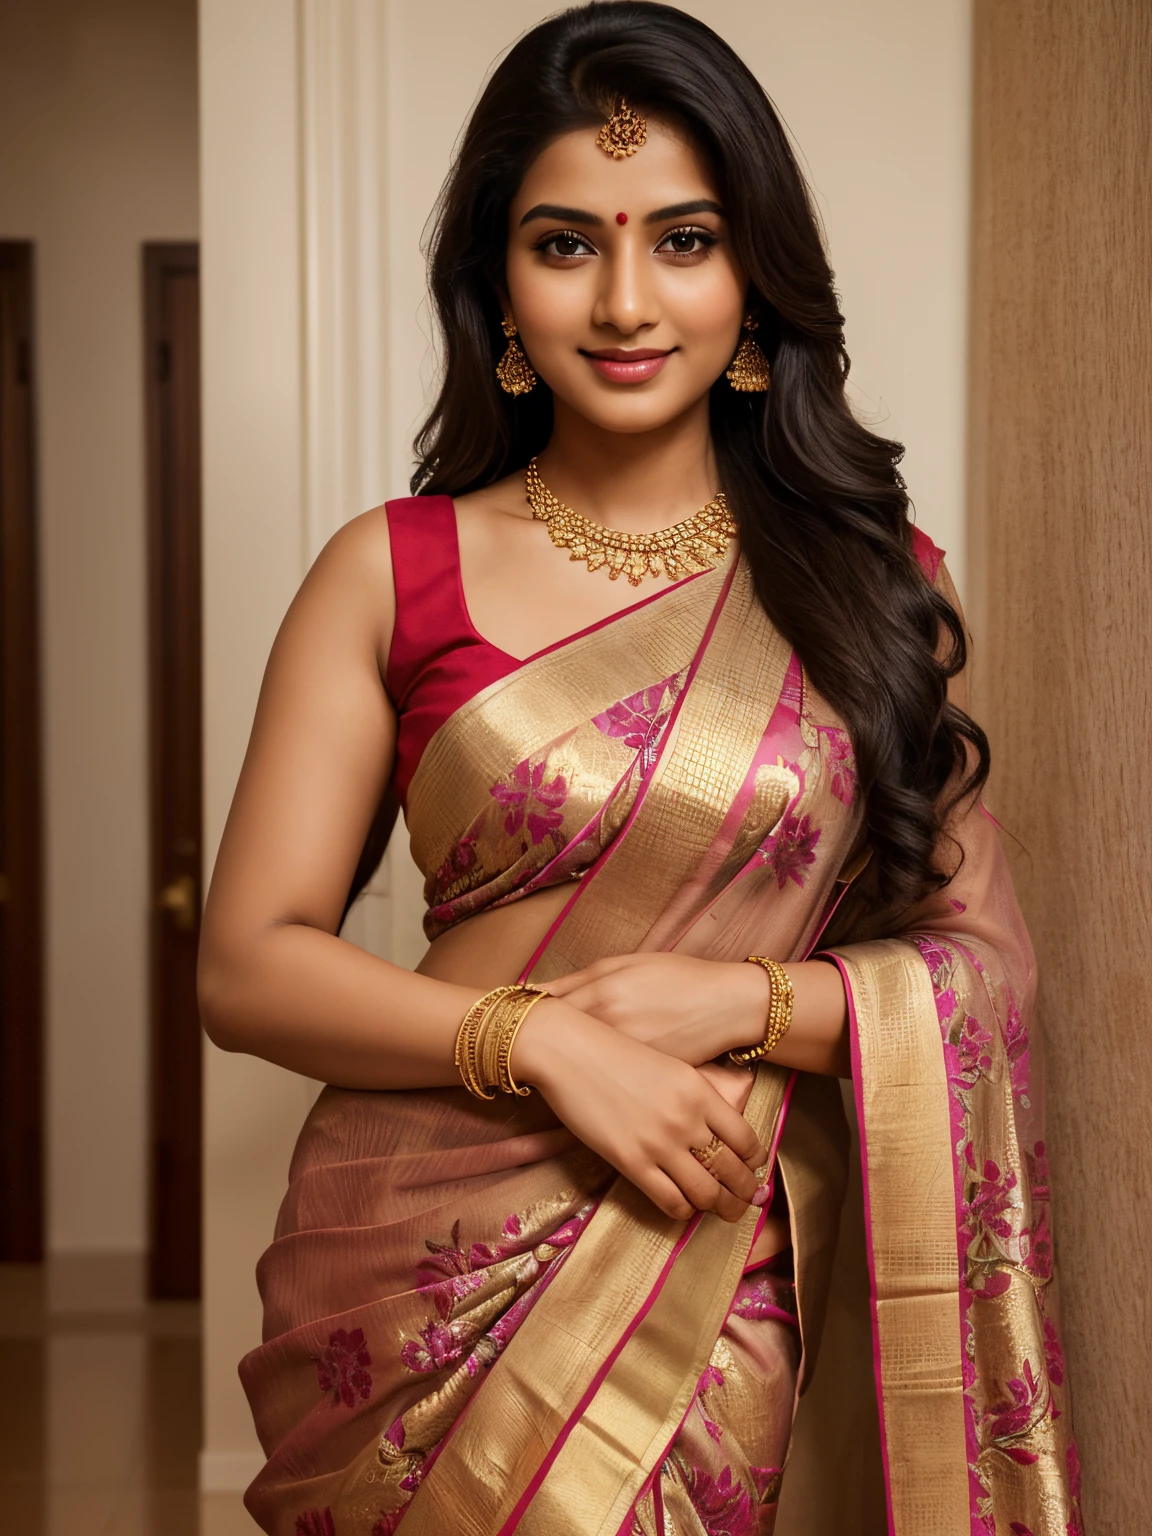 (masterpiece, high quality, HD, 32k, 64k), portrait of 25 year old extremely beautiful Tamil girl, (cute smile:0.6), (look at viewer), (fully clothed:1.6 floral saree, designer blouse, petticoat), (leaning:1.6 against the wall), inside the living room, soft colors, bright lighting, cinematic effects, backlit, shining skin, very long black hair, (arms crossed:1.6), (bangles, thin necklace, ear stud, wrist watch), (extremely beautiful:1.2 face & ears & cheeks & nose & lips & neck & hands & arms & 5 fingers & body parts & skin & curves), (background:1.6 wallpapers, tube lights, ceiling fan, door, windows, sofa, showcase, TV ), (full body shot :1.6 from bottom)